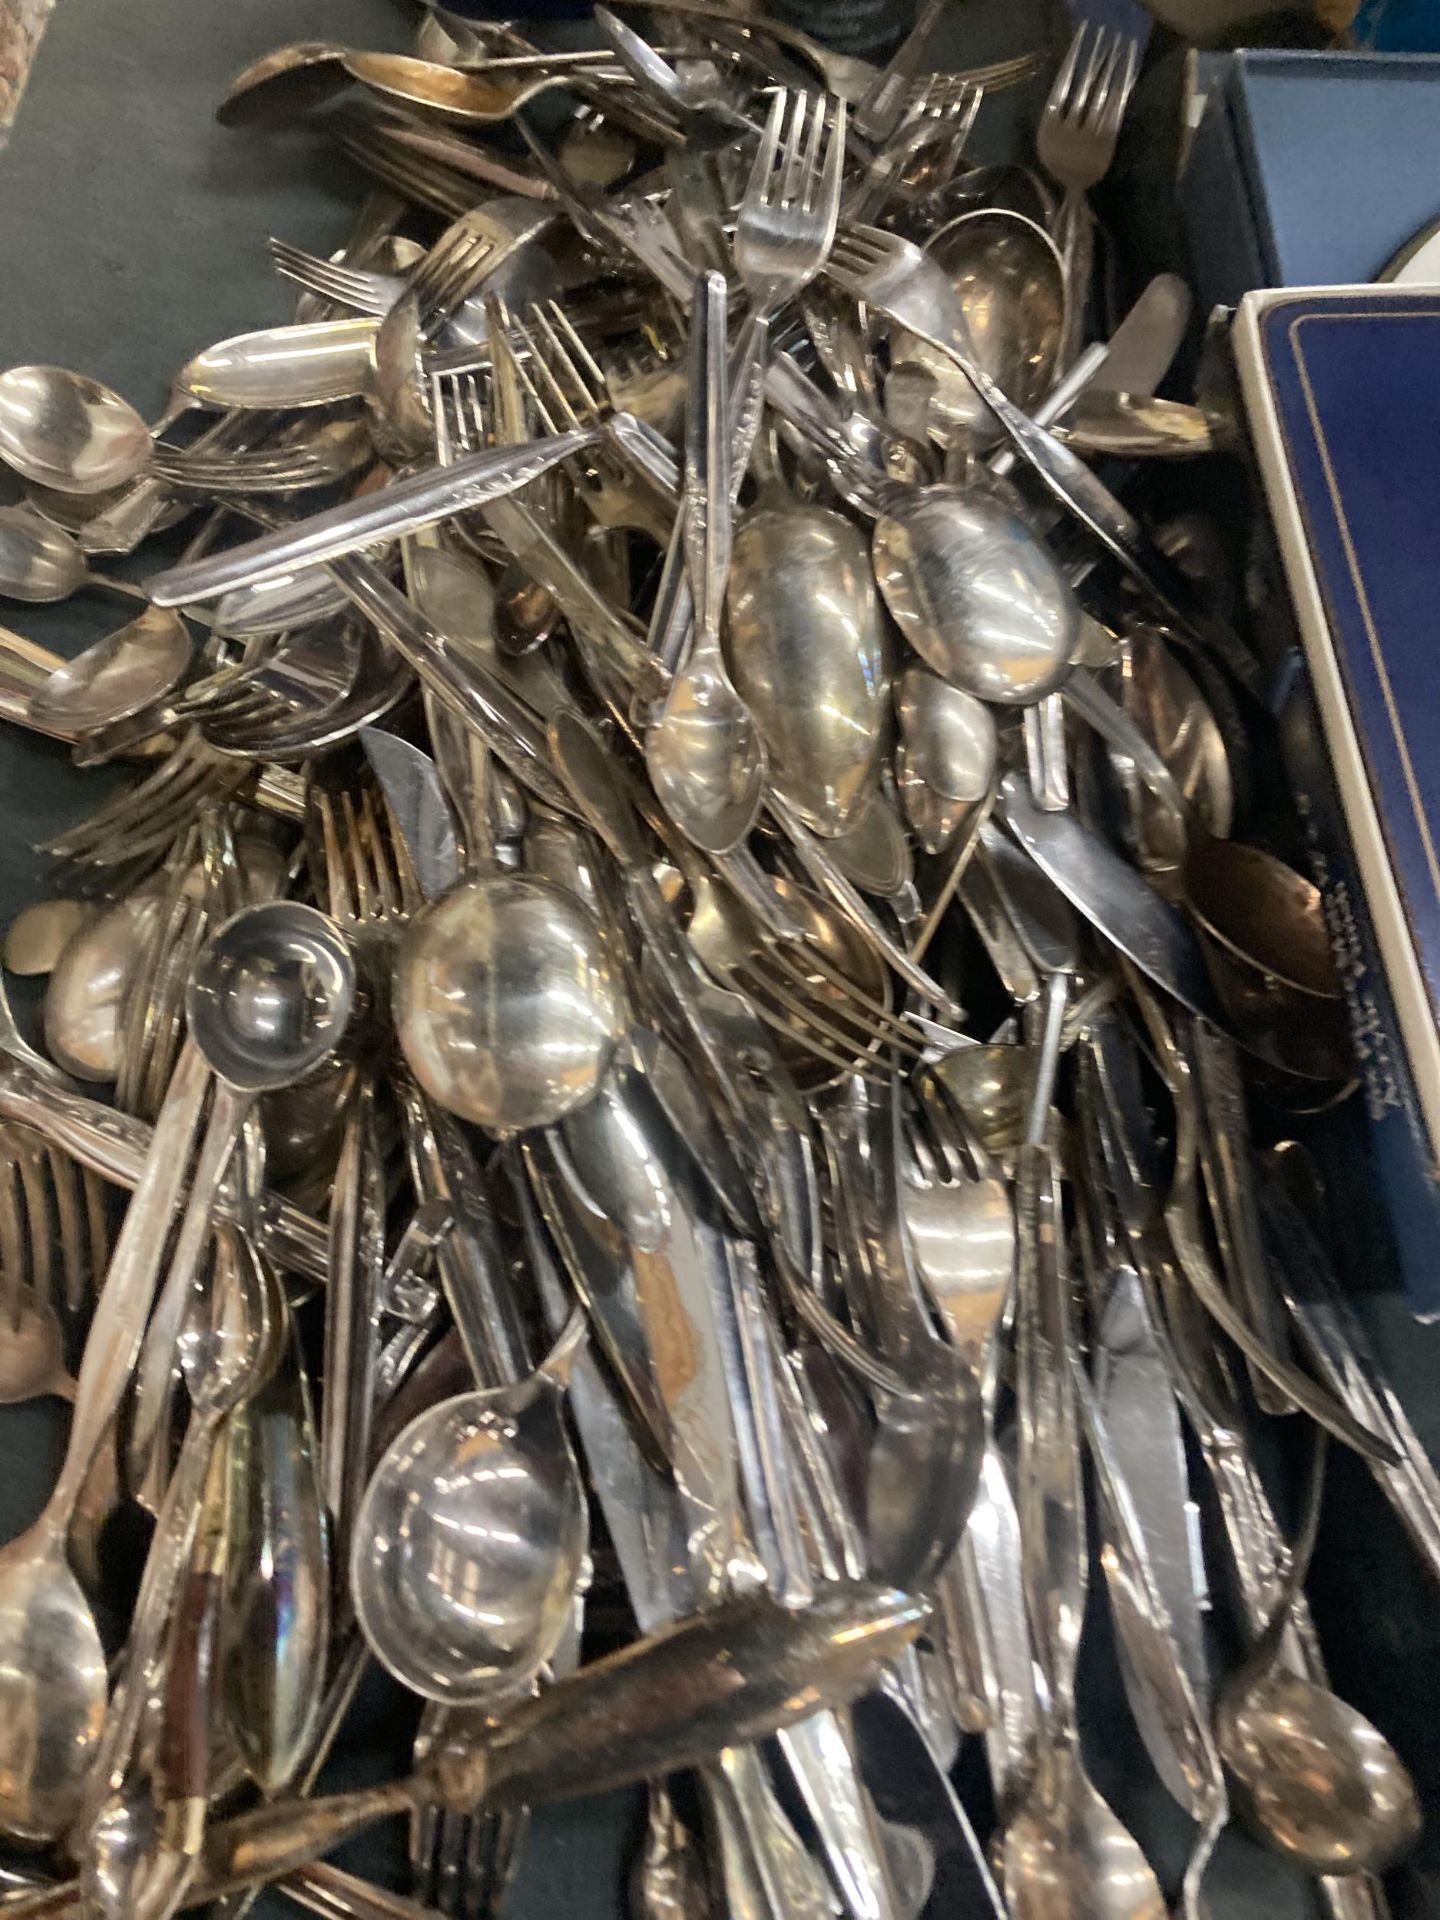 A LARGE QUANTITY OF KNIVES, FORKS, SPOONS, ETC PLUS POLISH - Image 2 of 2